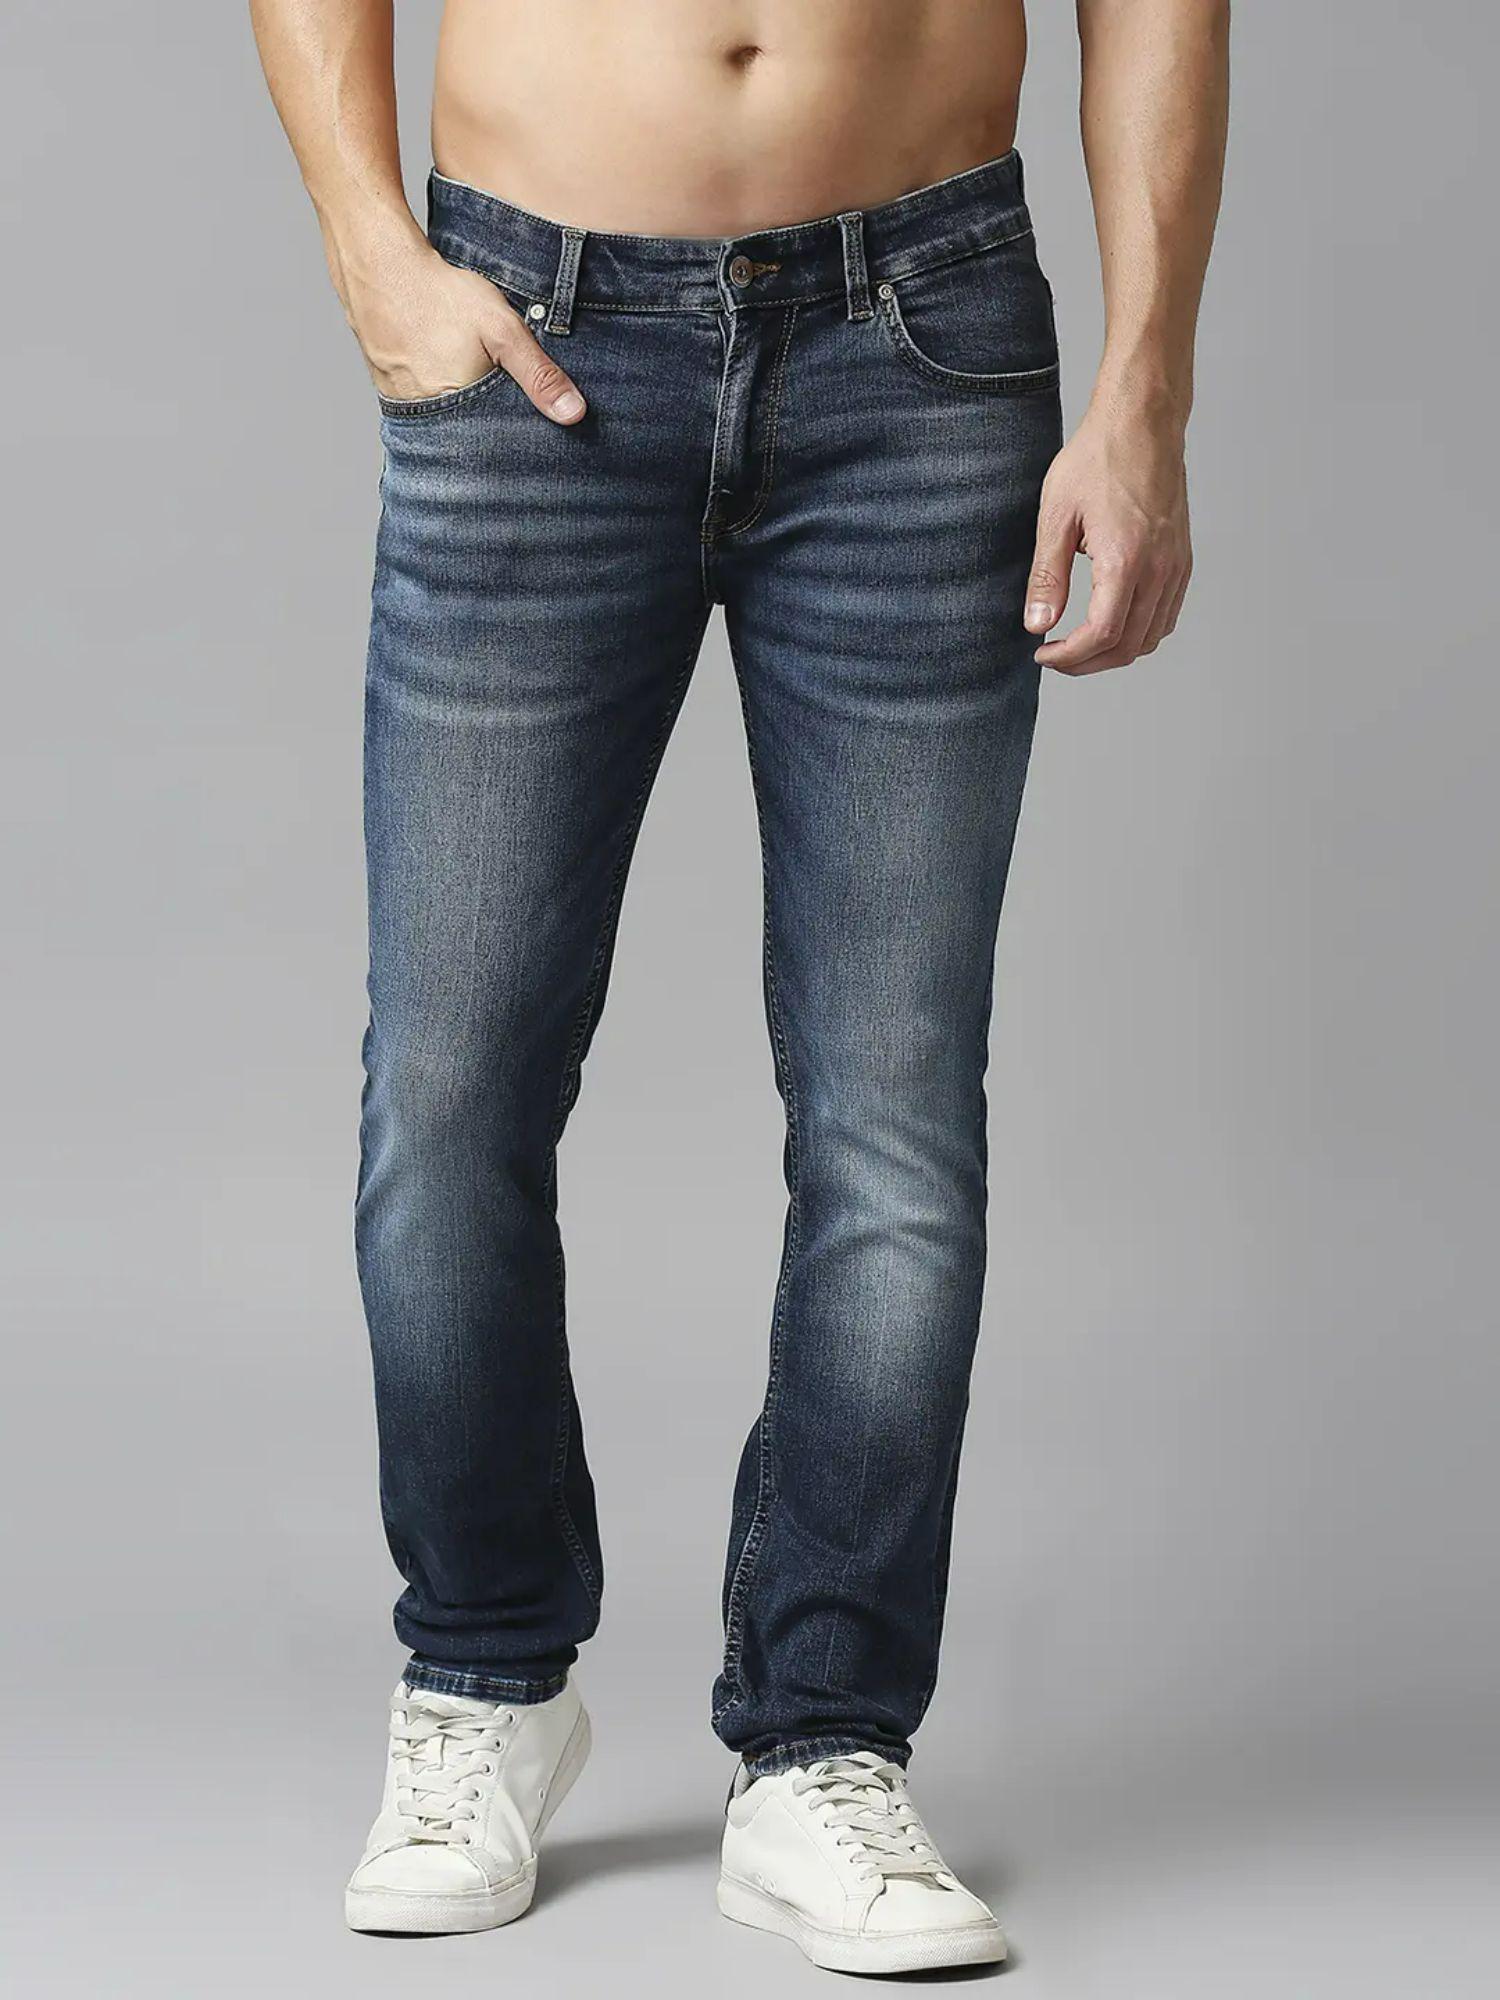 limited edition mid blue premium stretchable rover denim for men